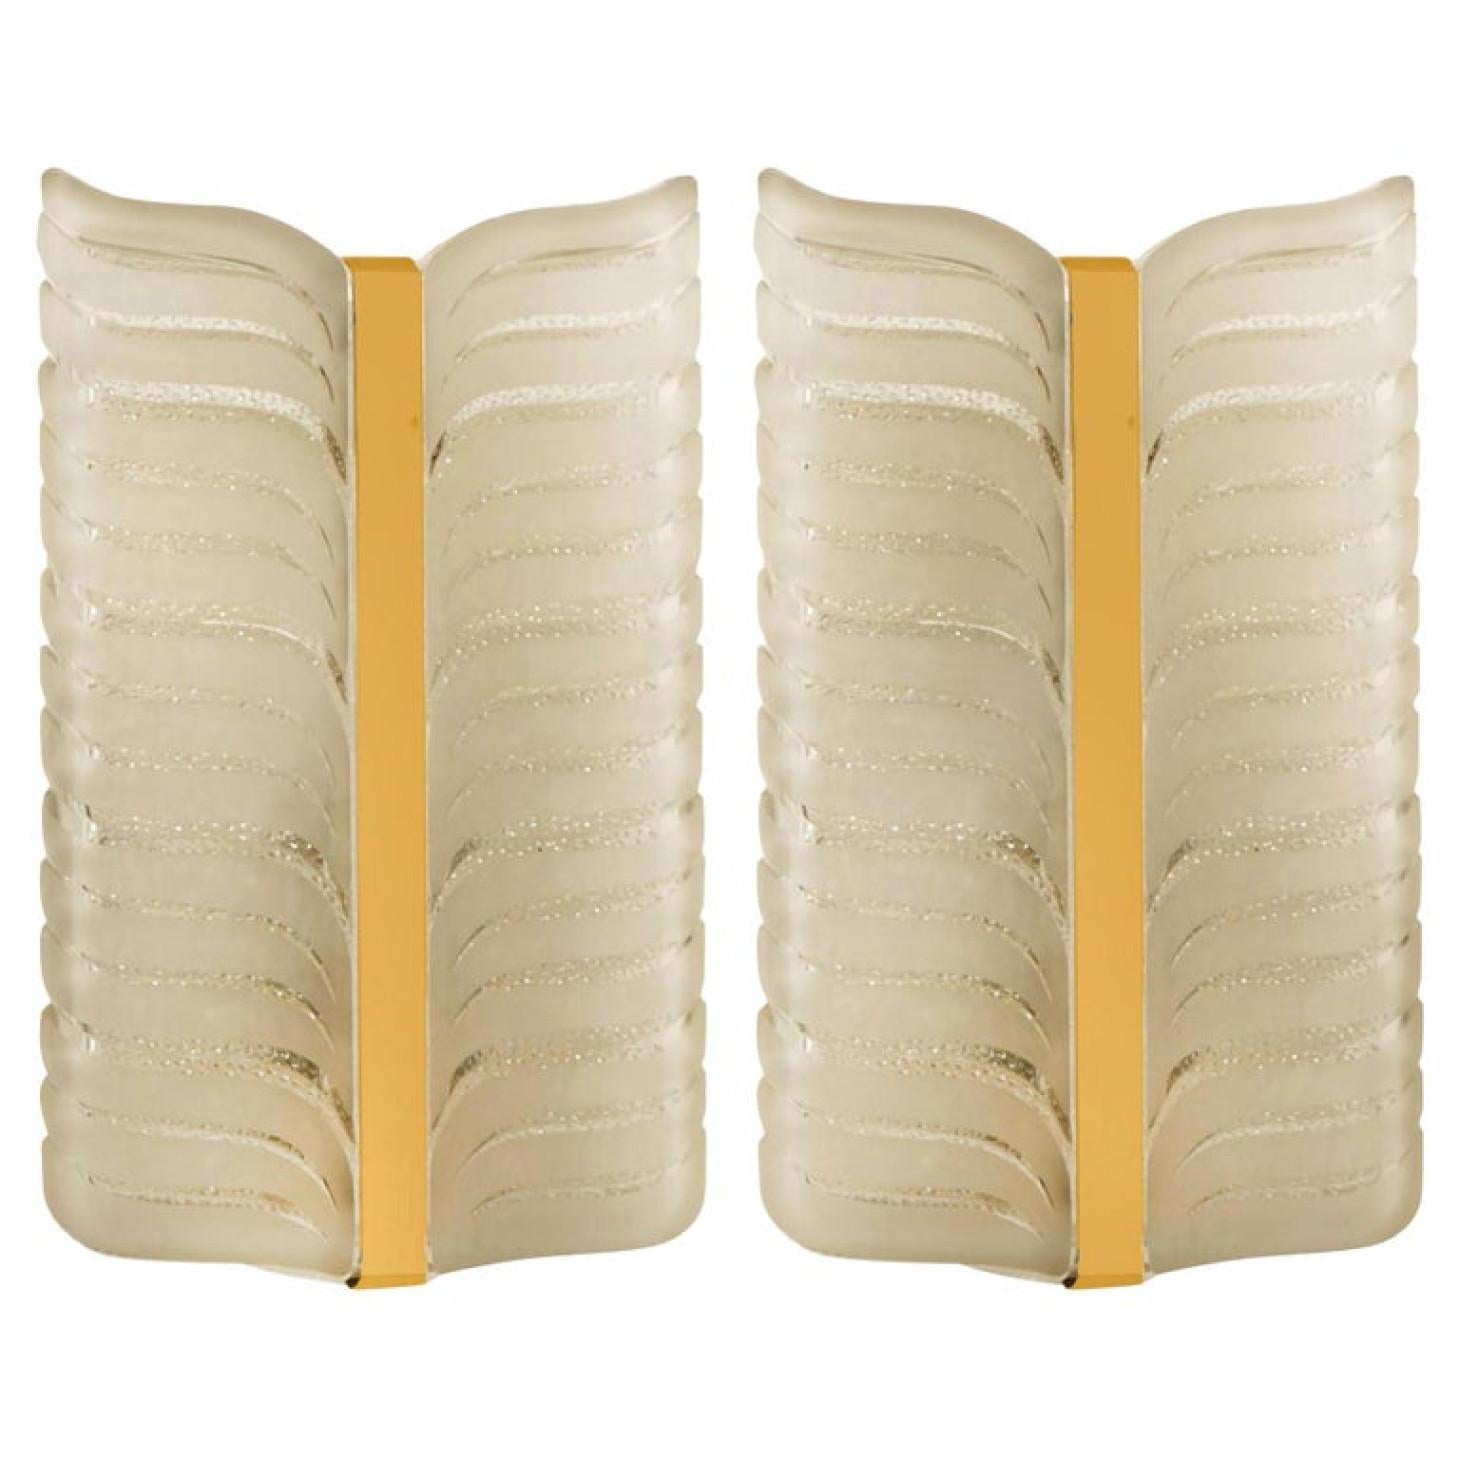 Pair of  of Kalmar leaf sconces. Brass center with two panels of glass surrounding both sides.
Thick glass with opaque lines in leaf pattern.

Minimalistic design executed with a taste for excellence in craftsmanship. Good cleaned respecting the